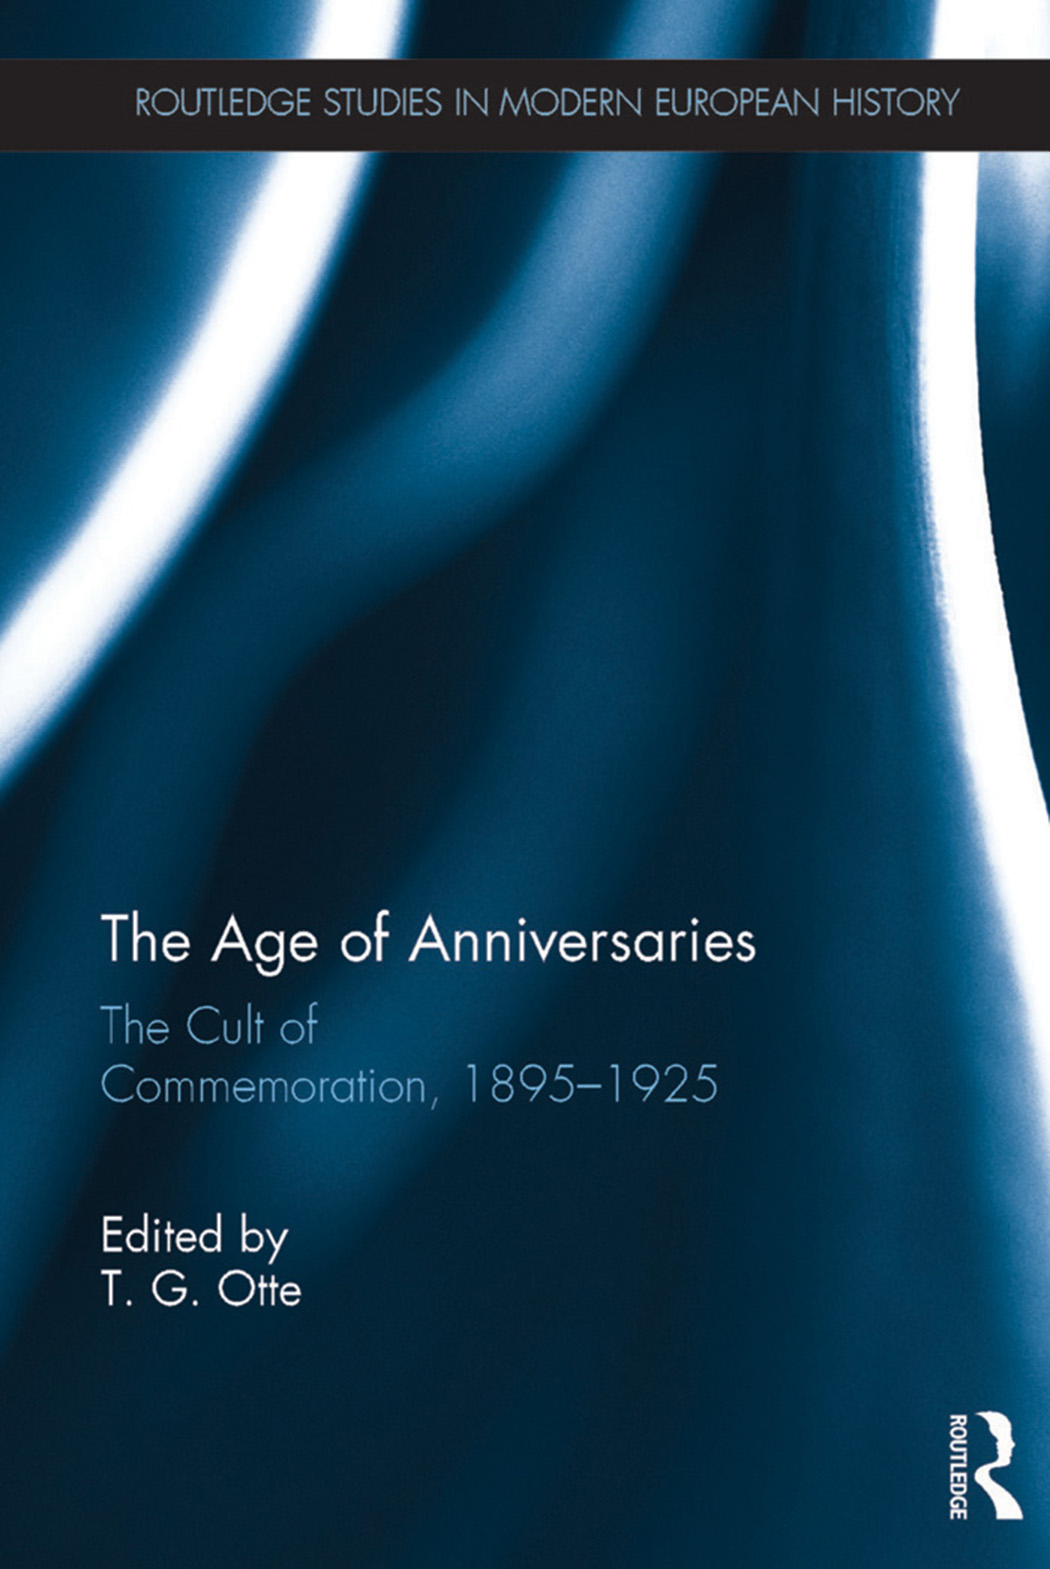 The Age of Anniversaries The Cult of Commemoration 1895-1925 - image 1